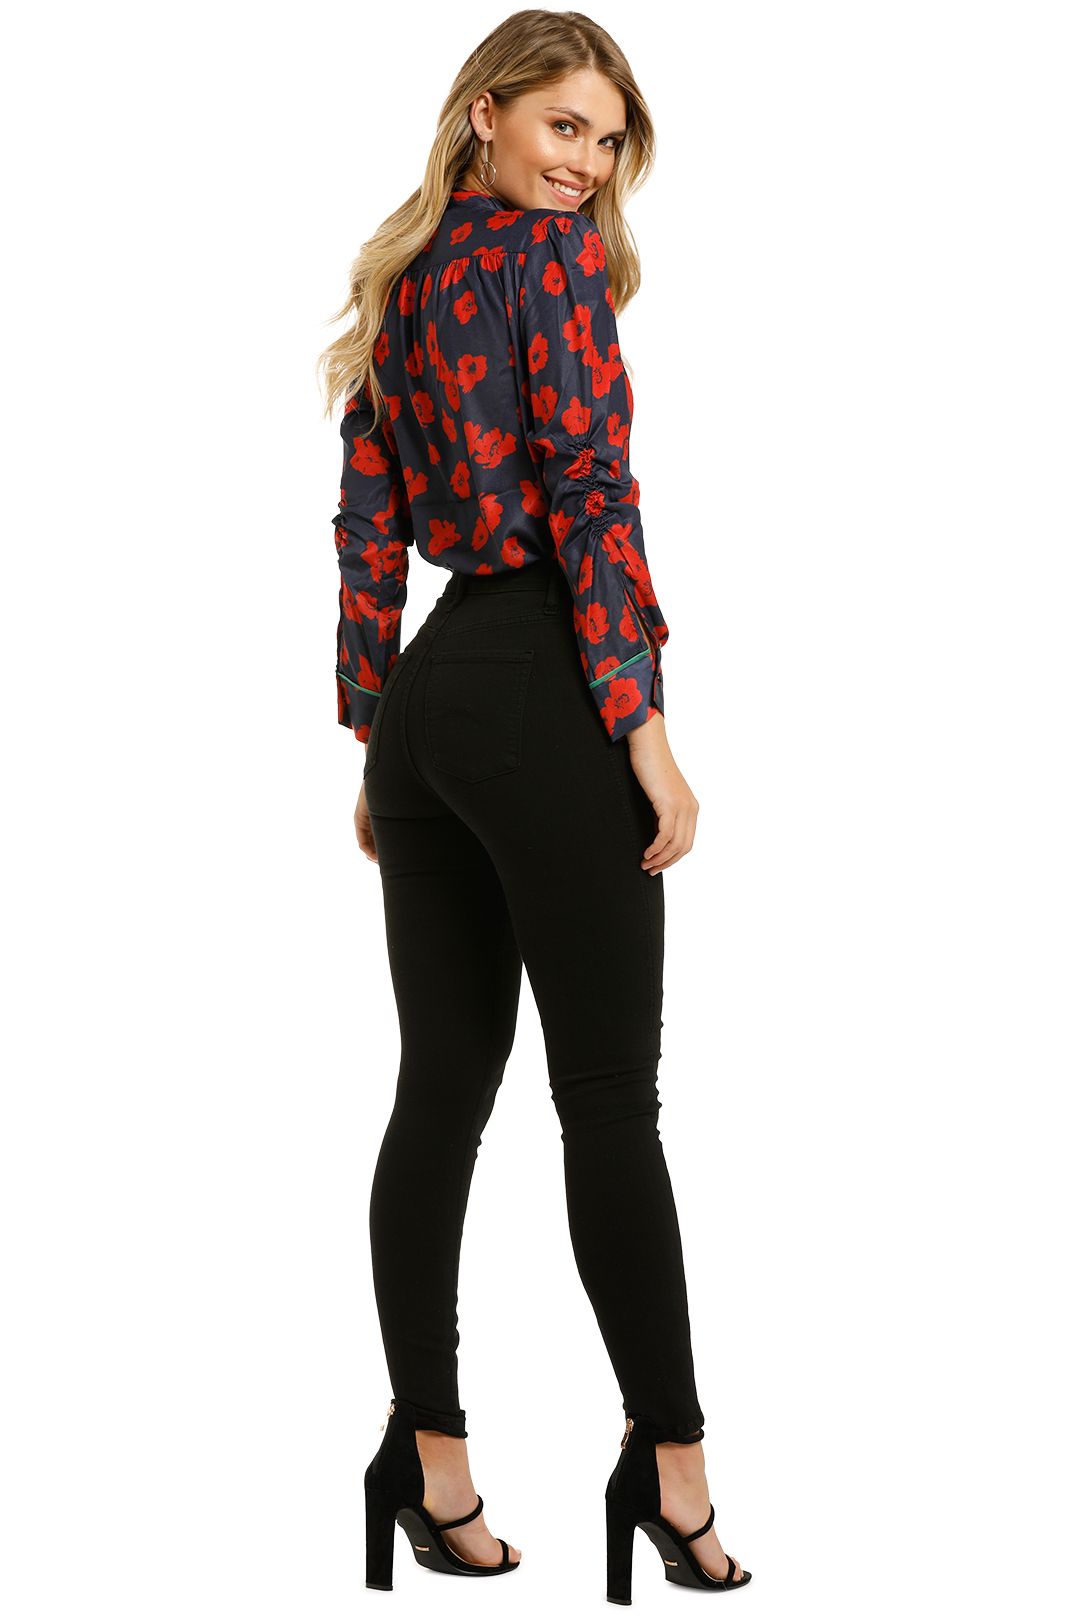 Grace-Willow-River-Blouse-Red-Poppy-Print-Back